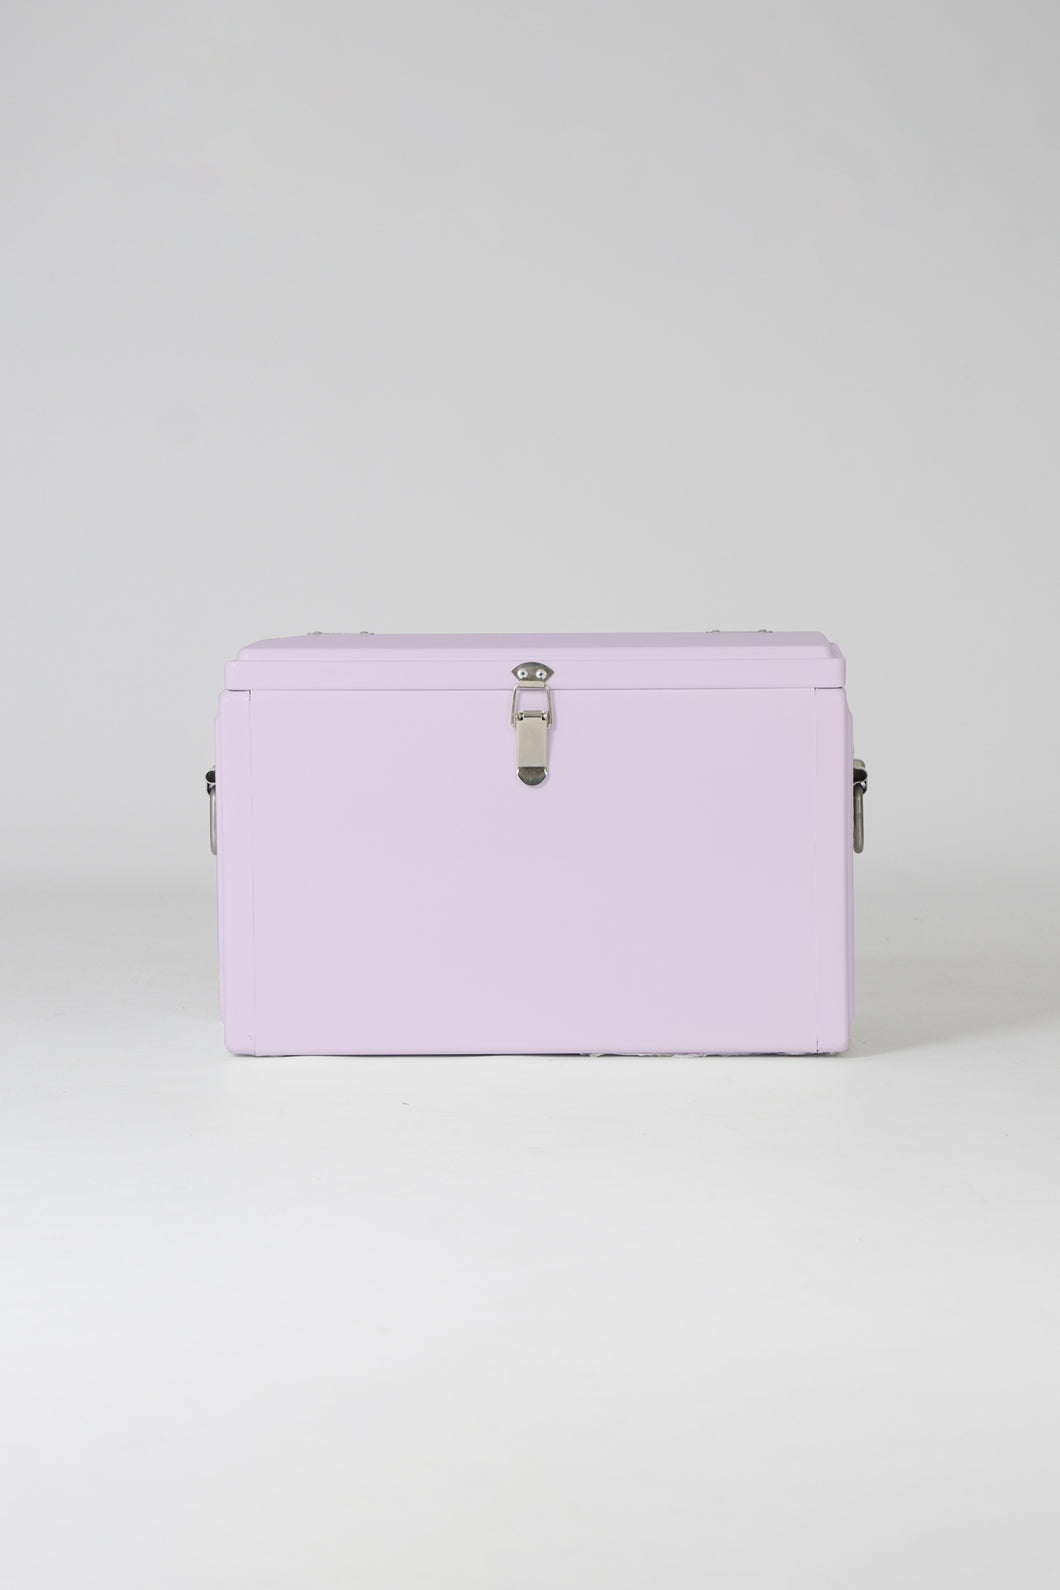 Napoleon Chilly Bin — Lilac